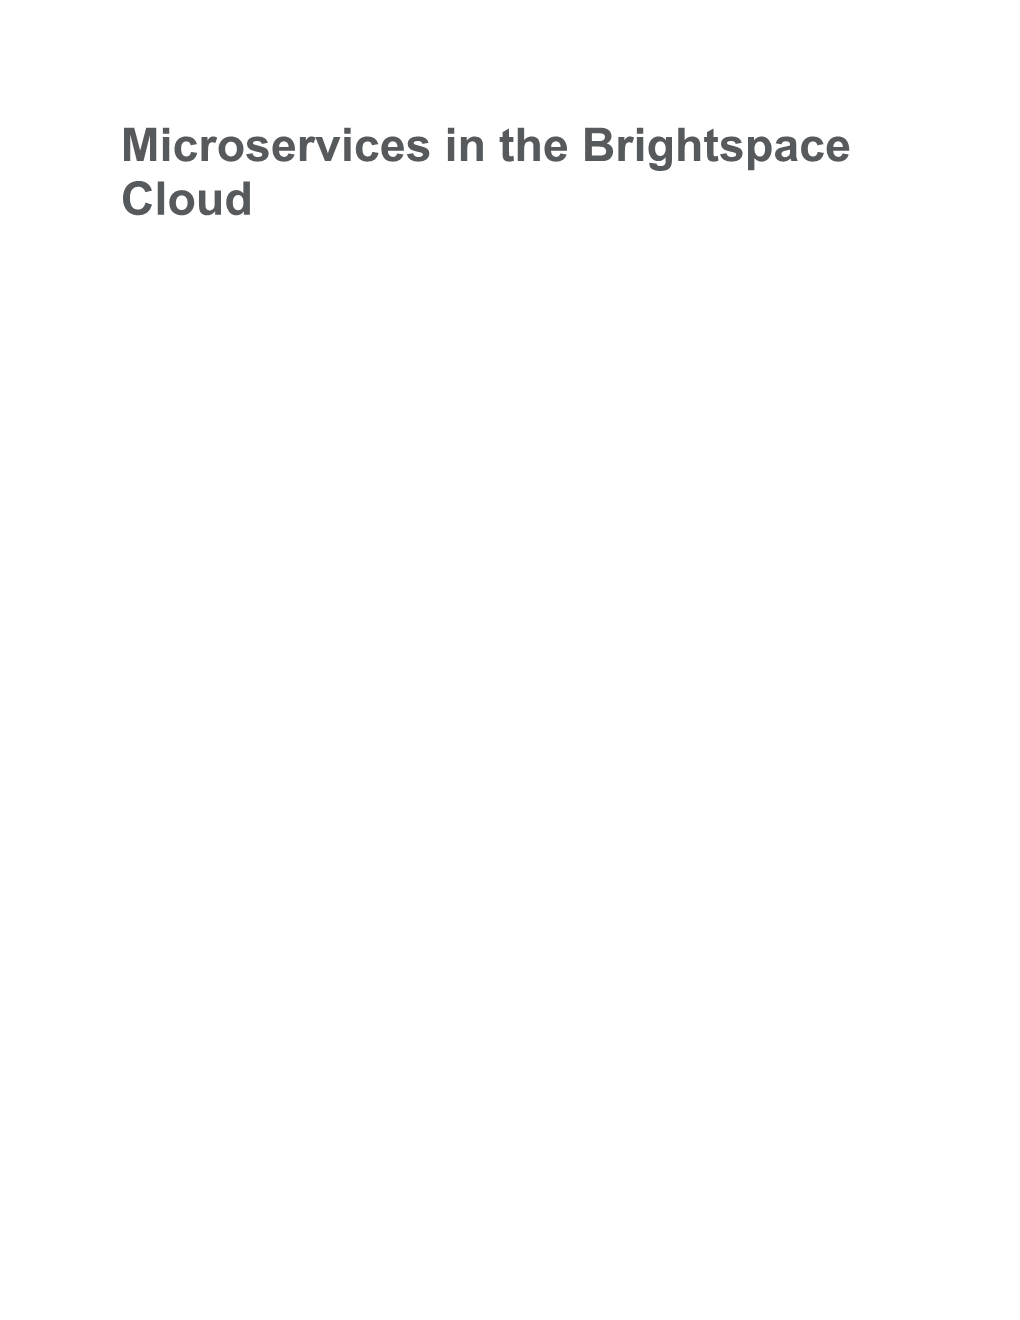 Microservices Guide Title